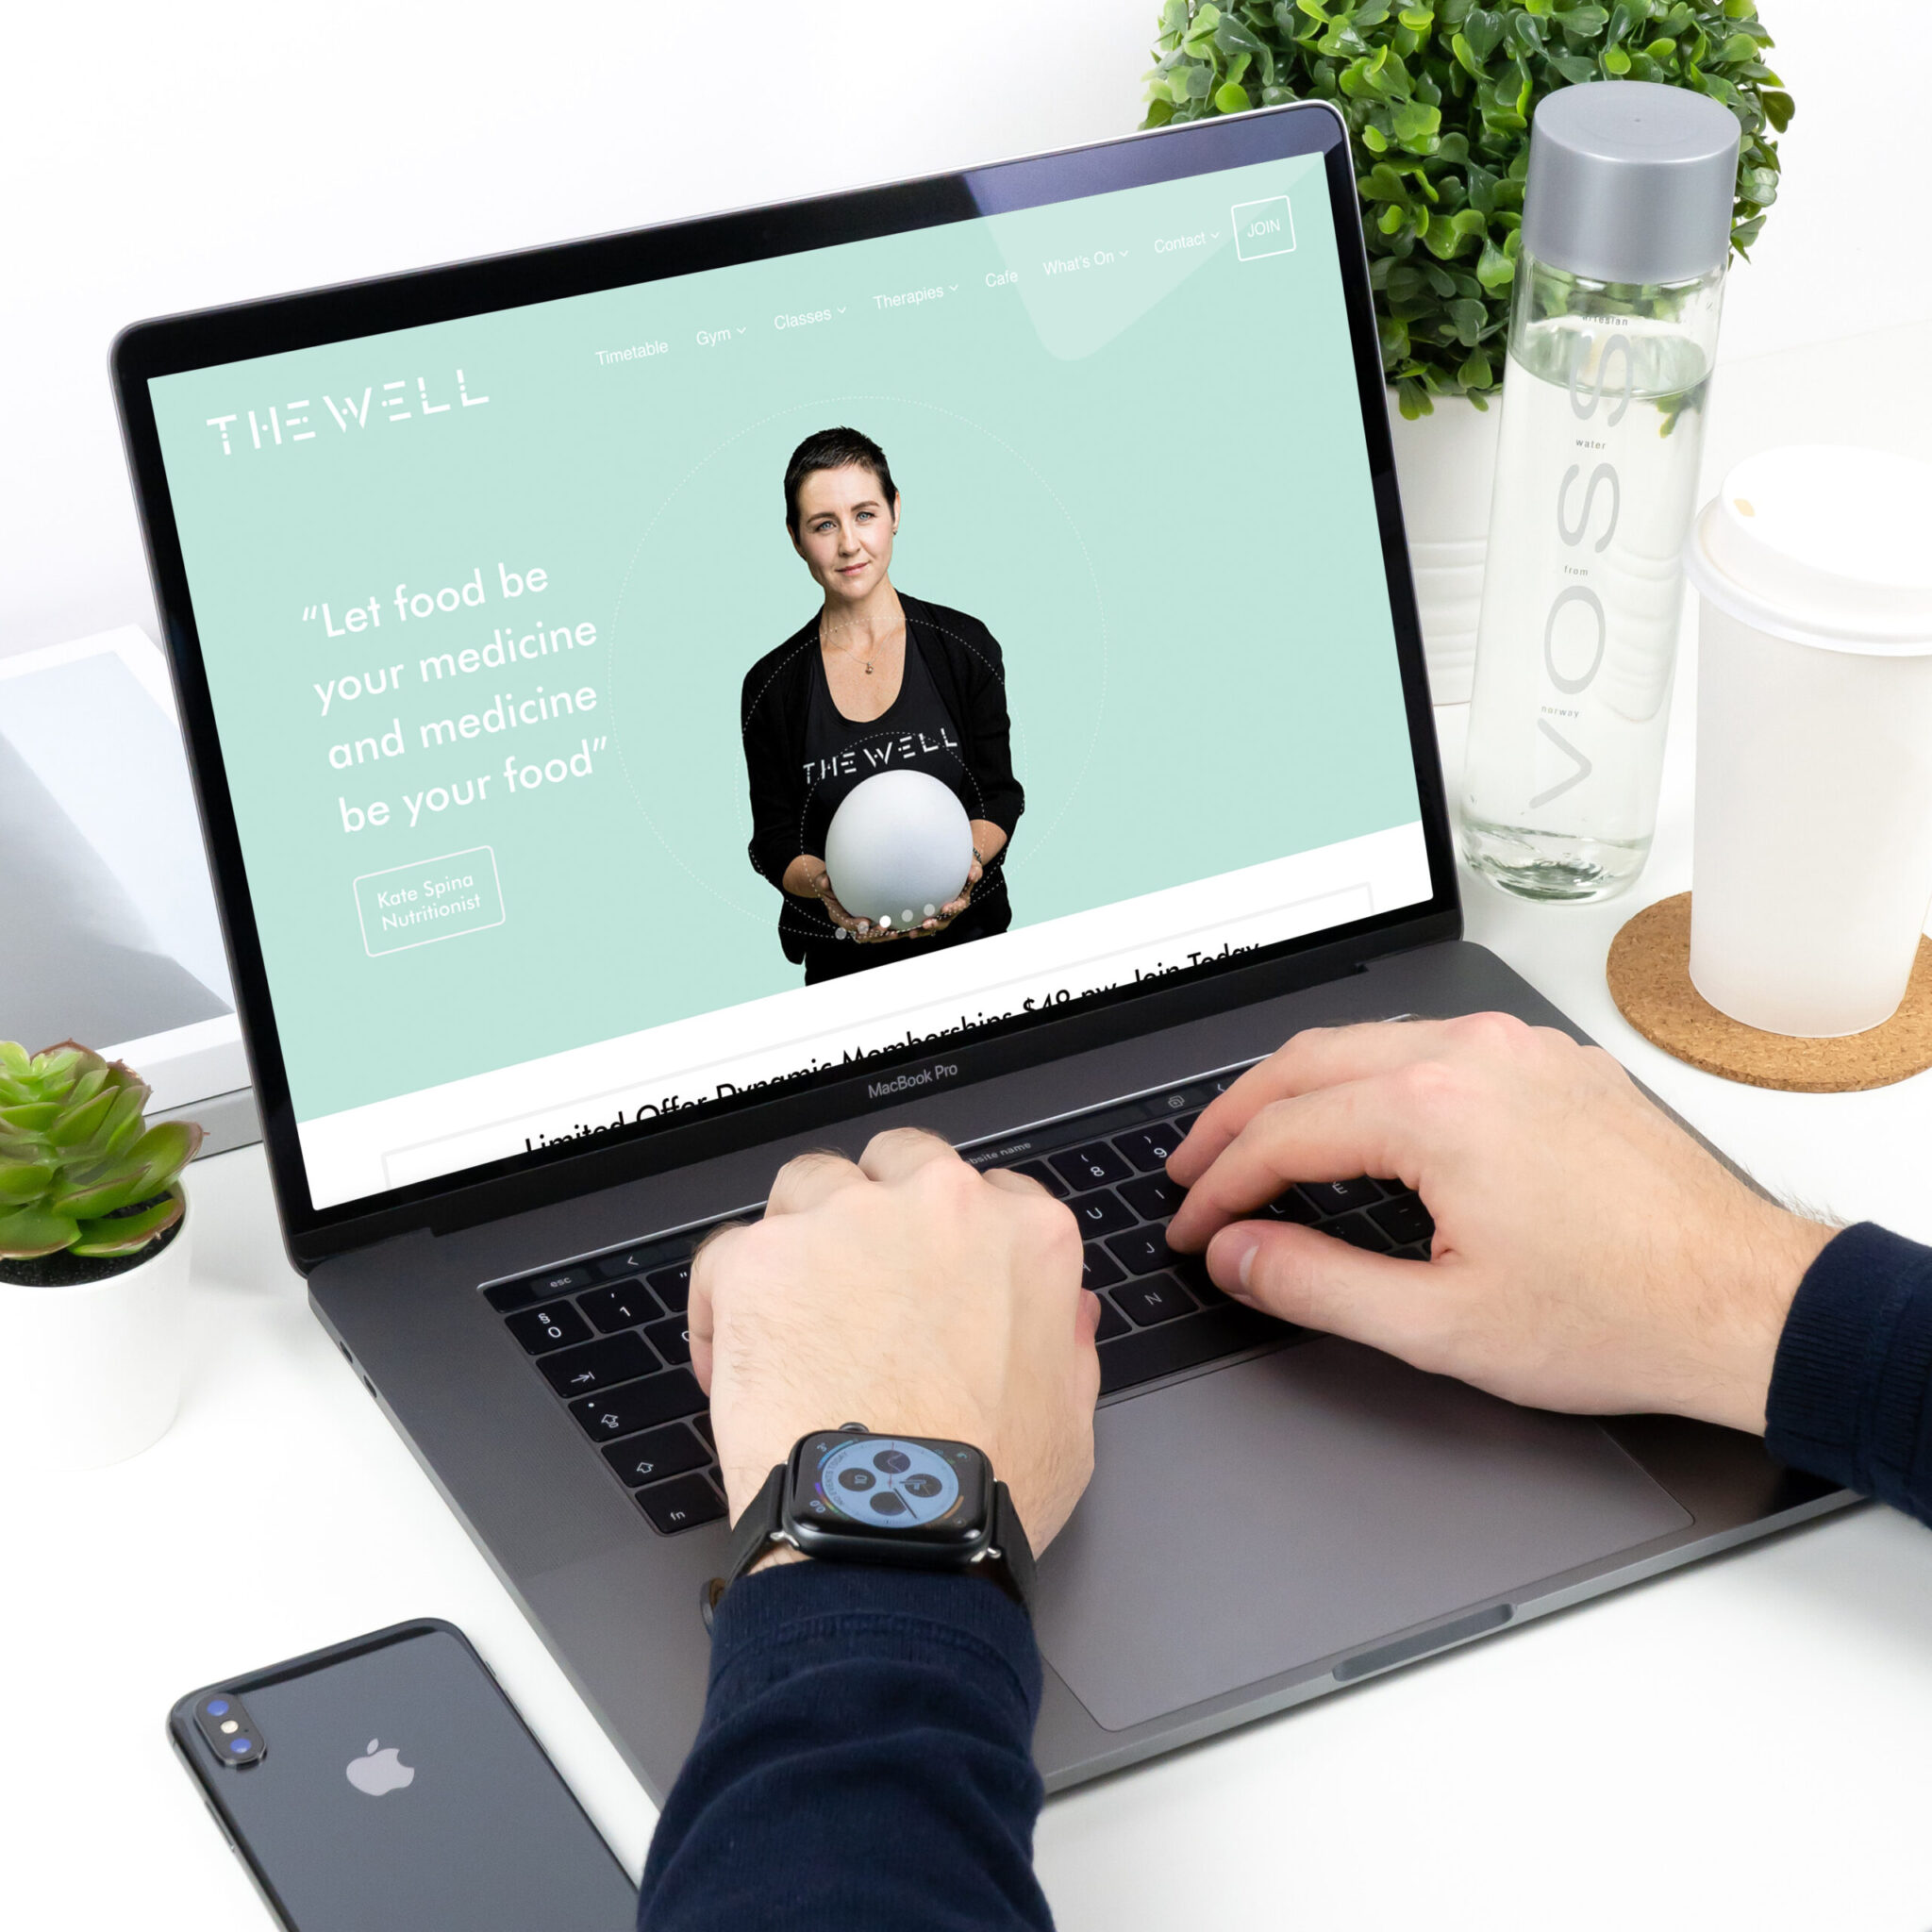 1-Free-Man-Working-on-MacBook-Pro-Mockup-PSD-scaled